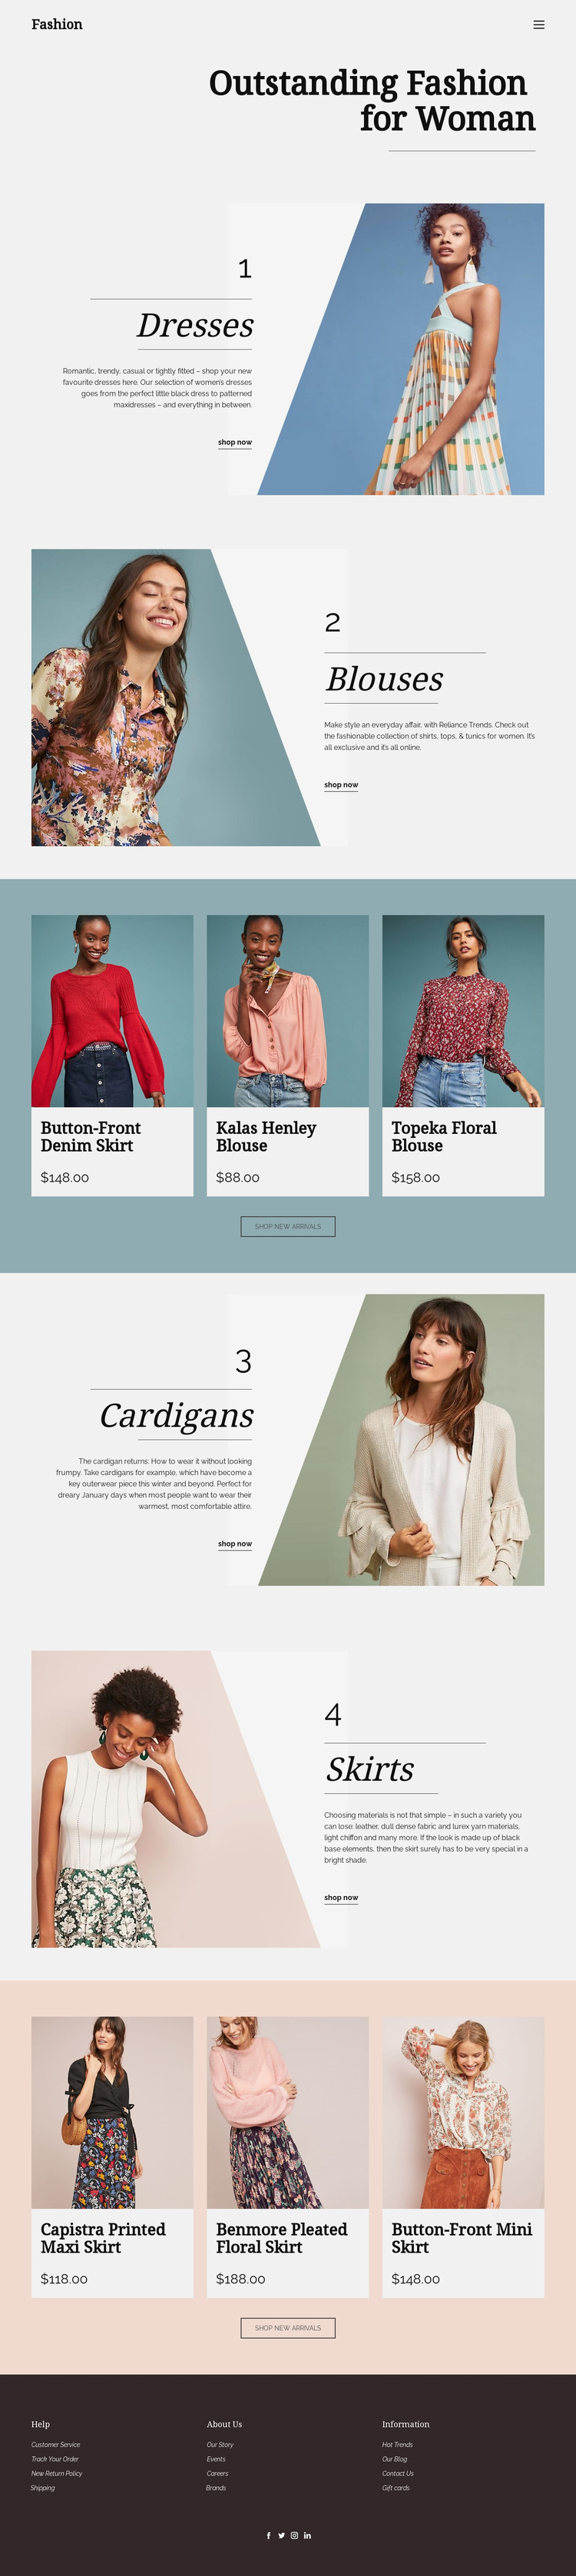 Fashion for Woman Website Design